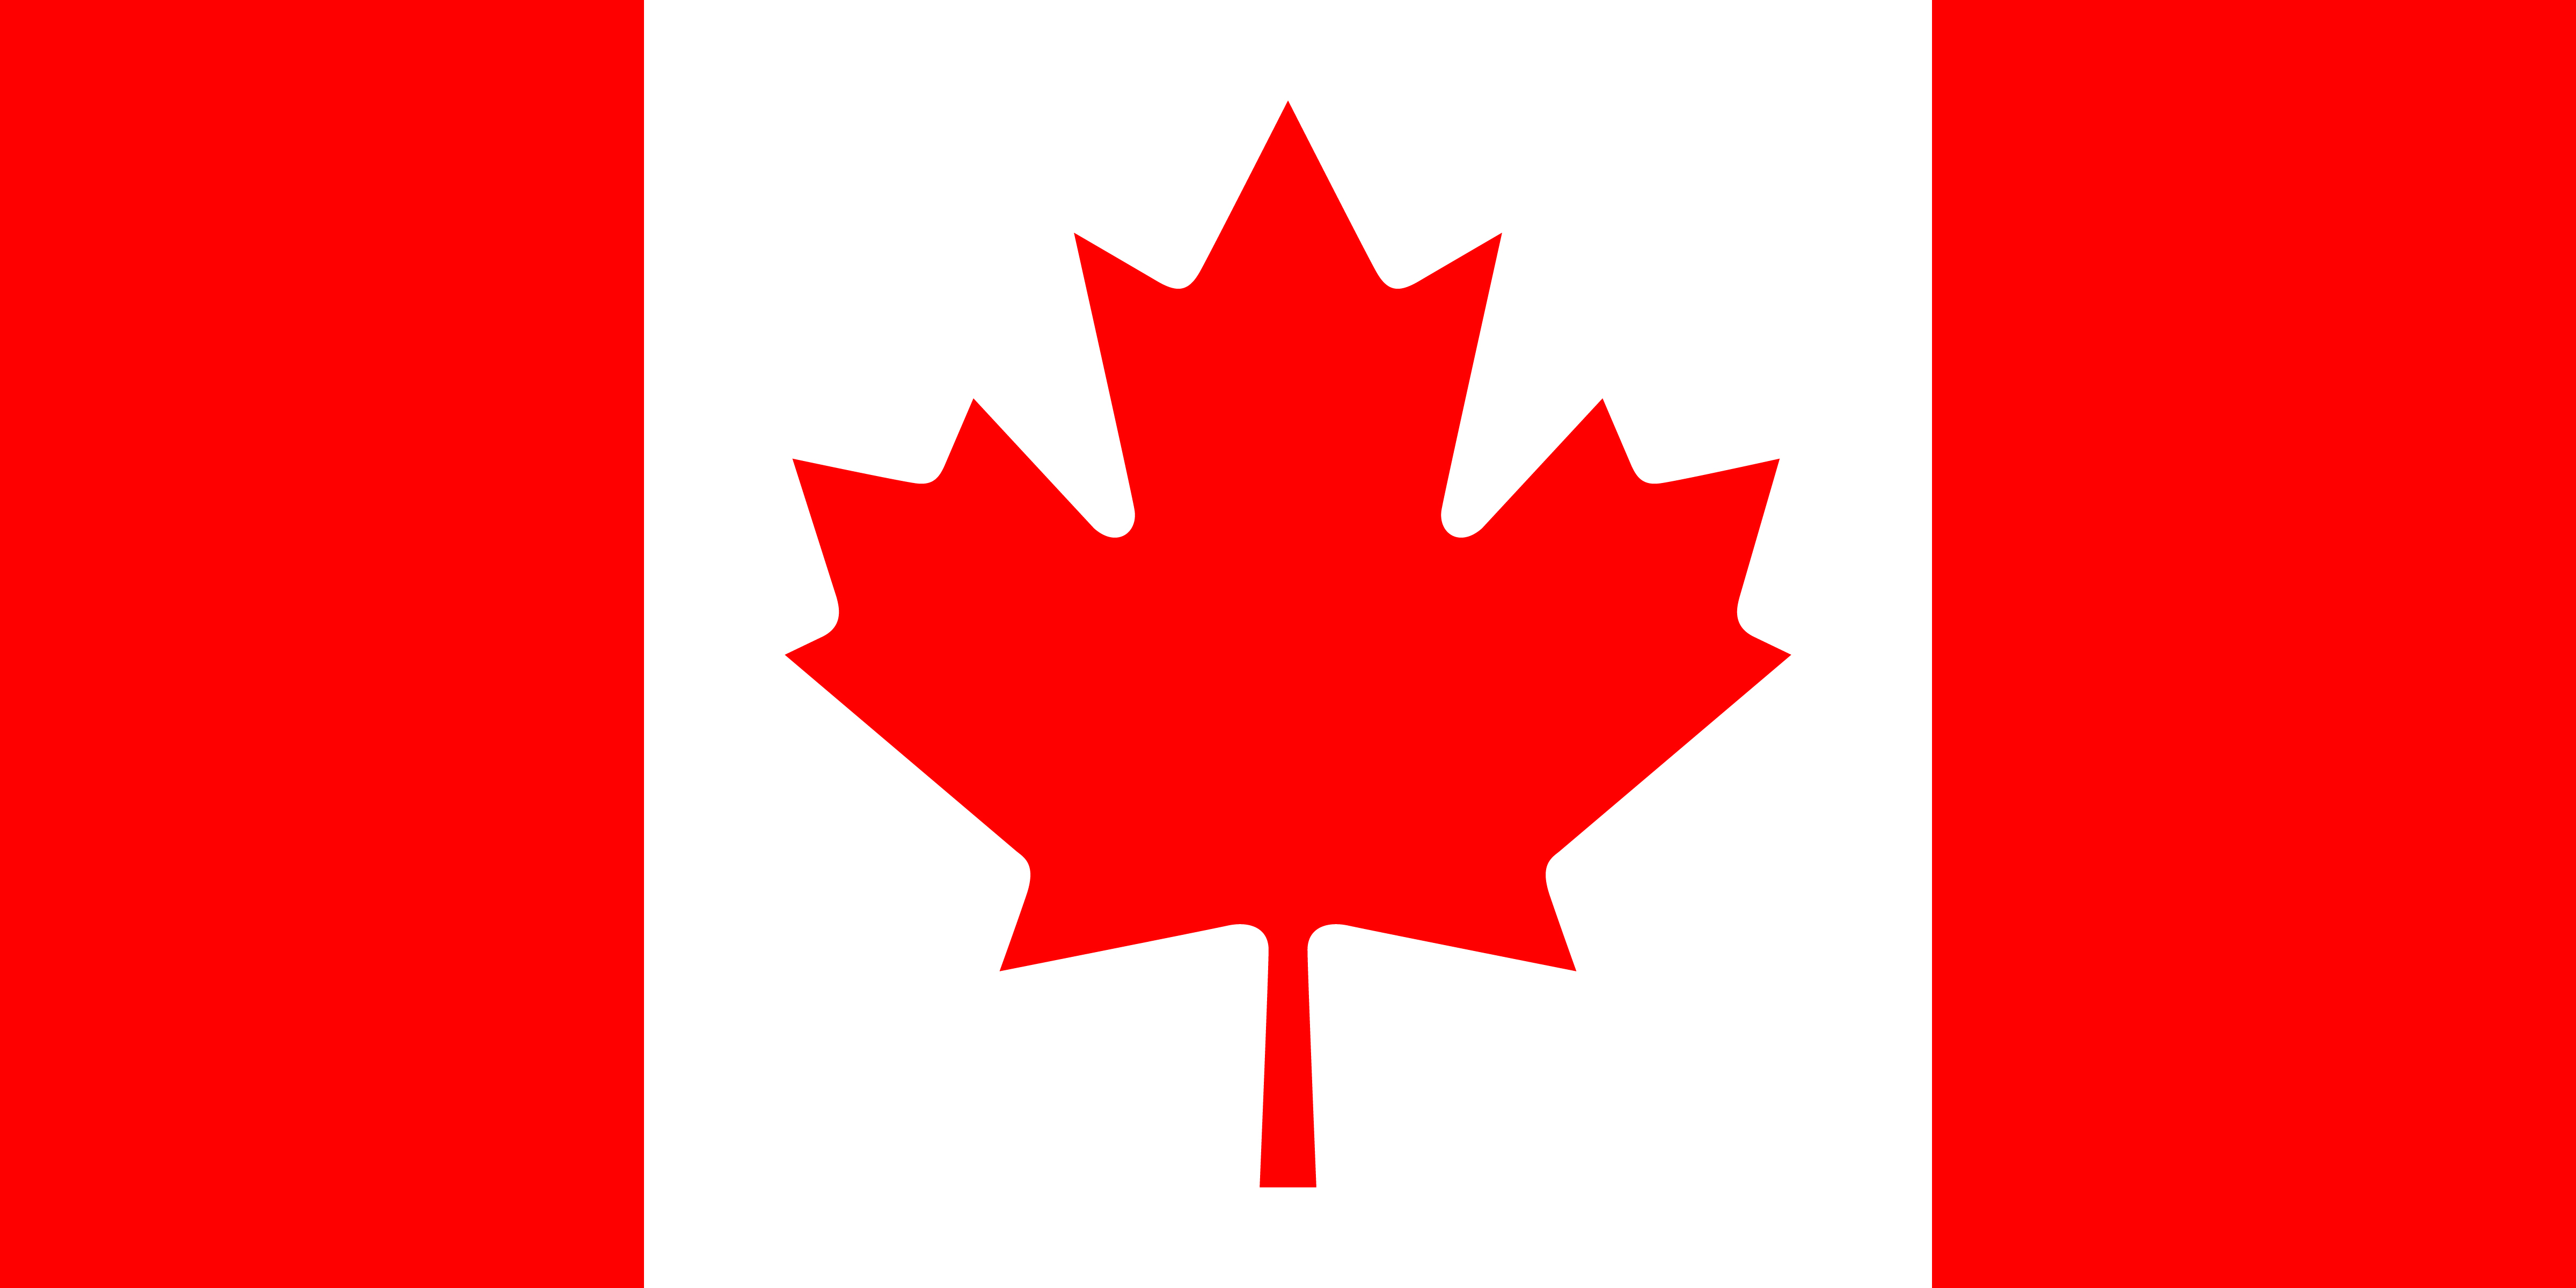 Image of the Flag of Canada